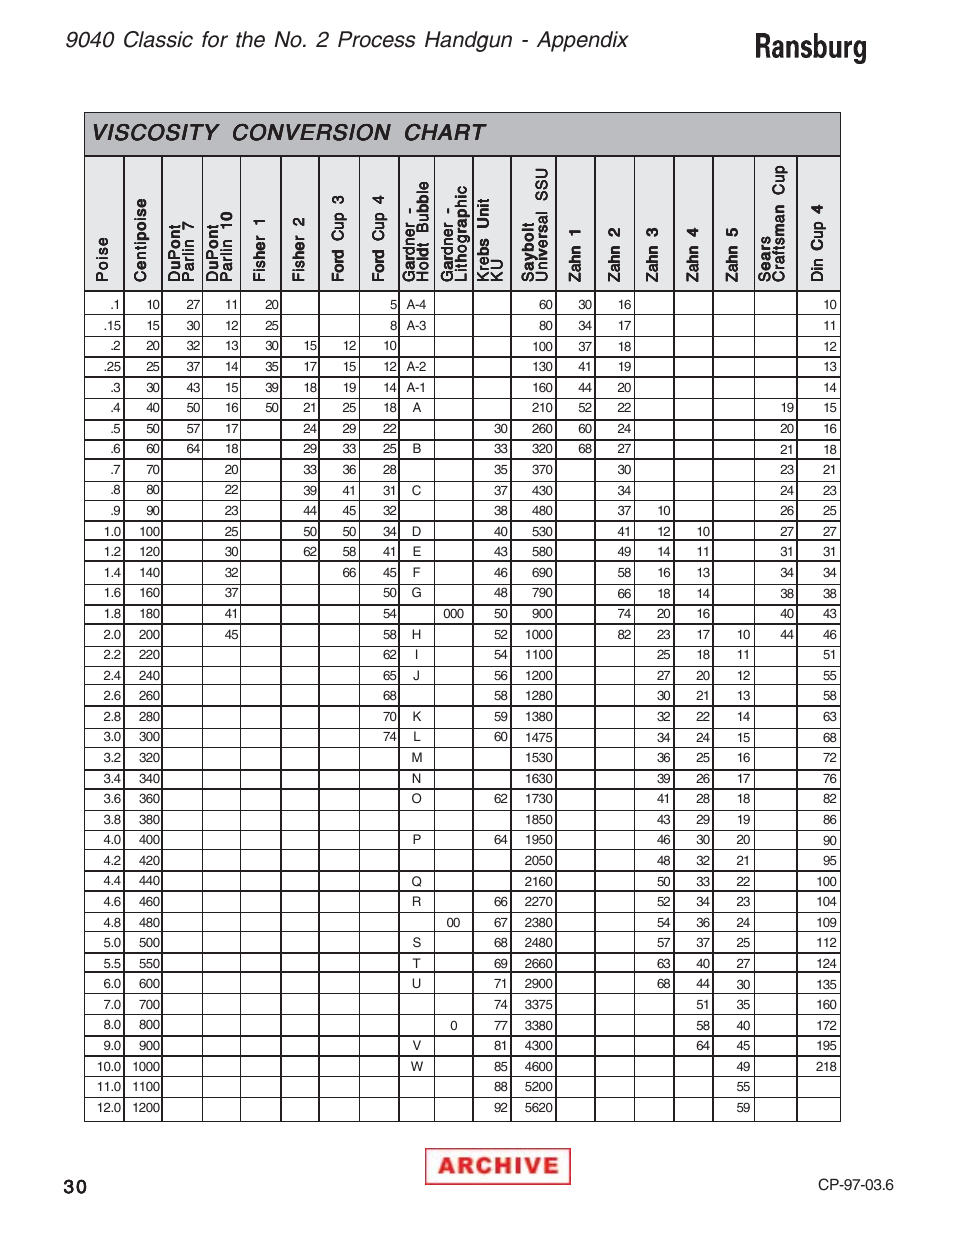 Ford Viscosity Cup Conversion Chart